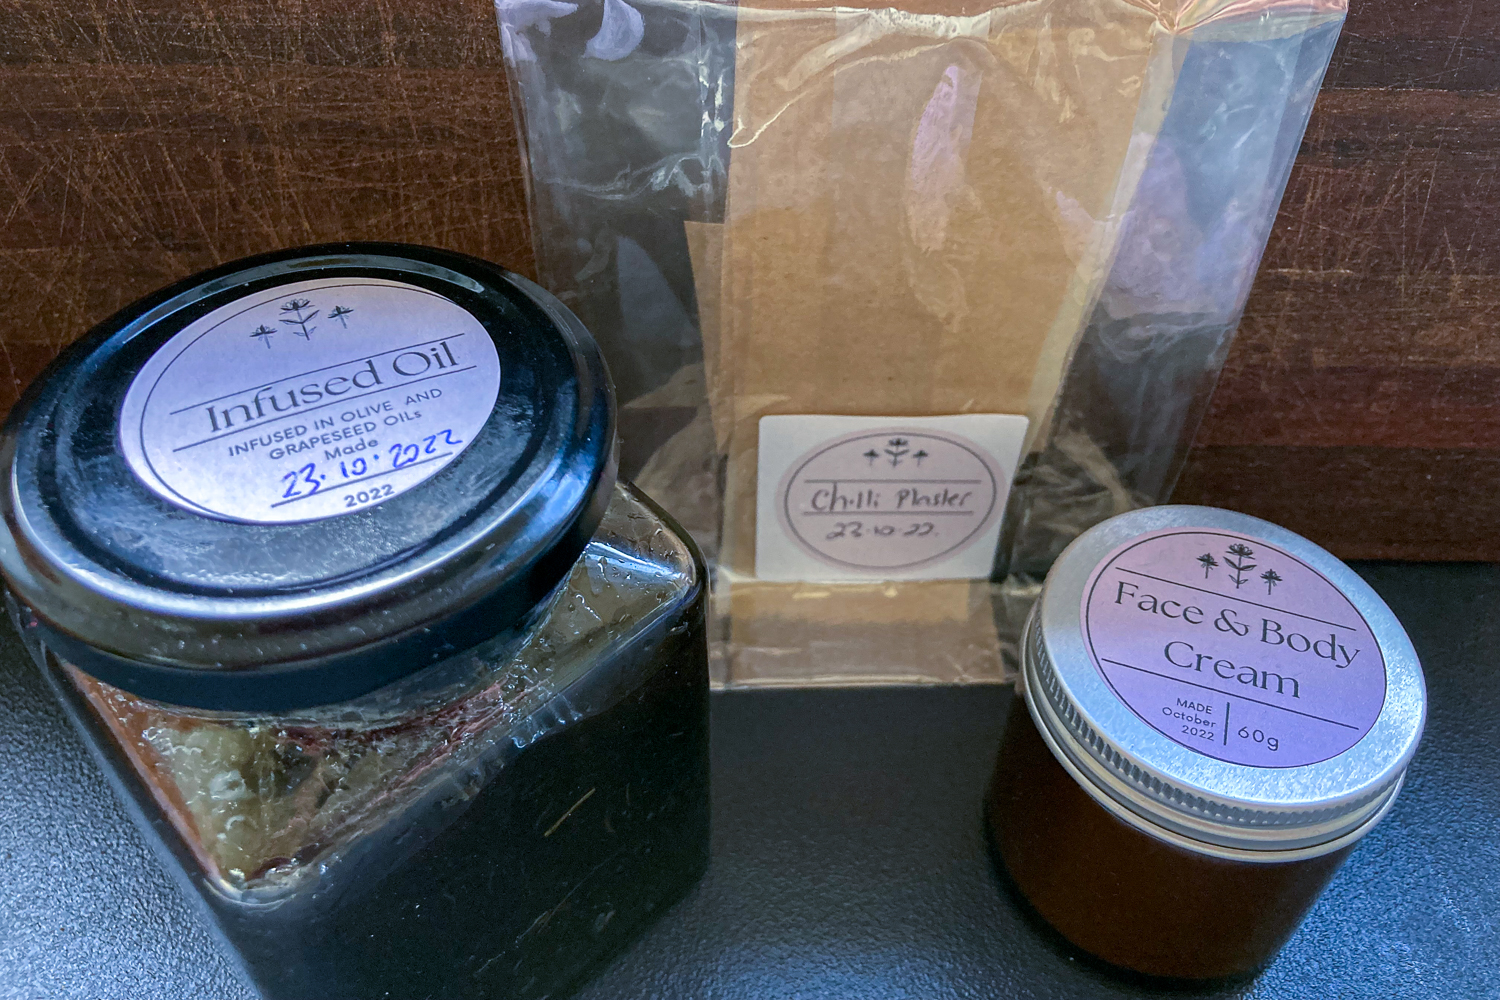 Two jars and a plastic bag. The bag contains a brown strip of kitchen paper labelled chilli plaster, the large jar is infused oil and the small jar is face & body cream